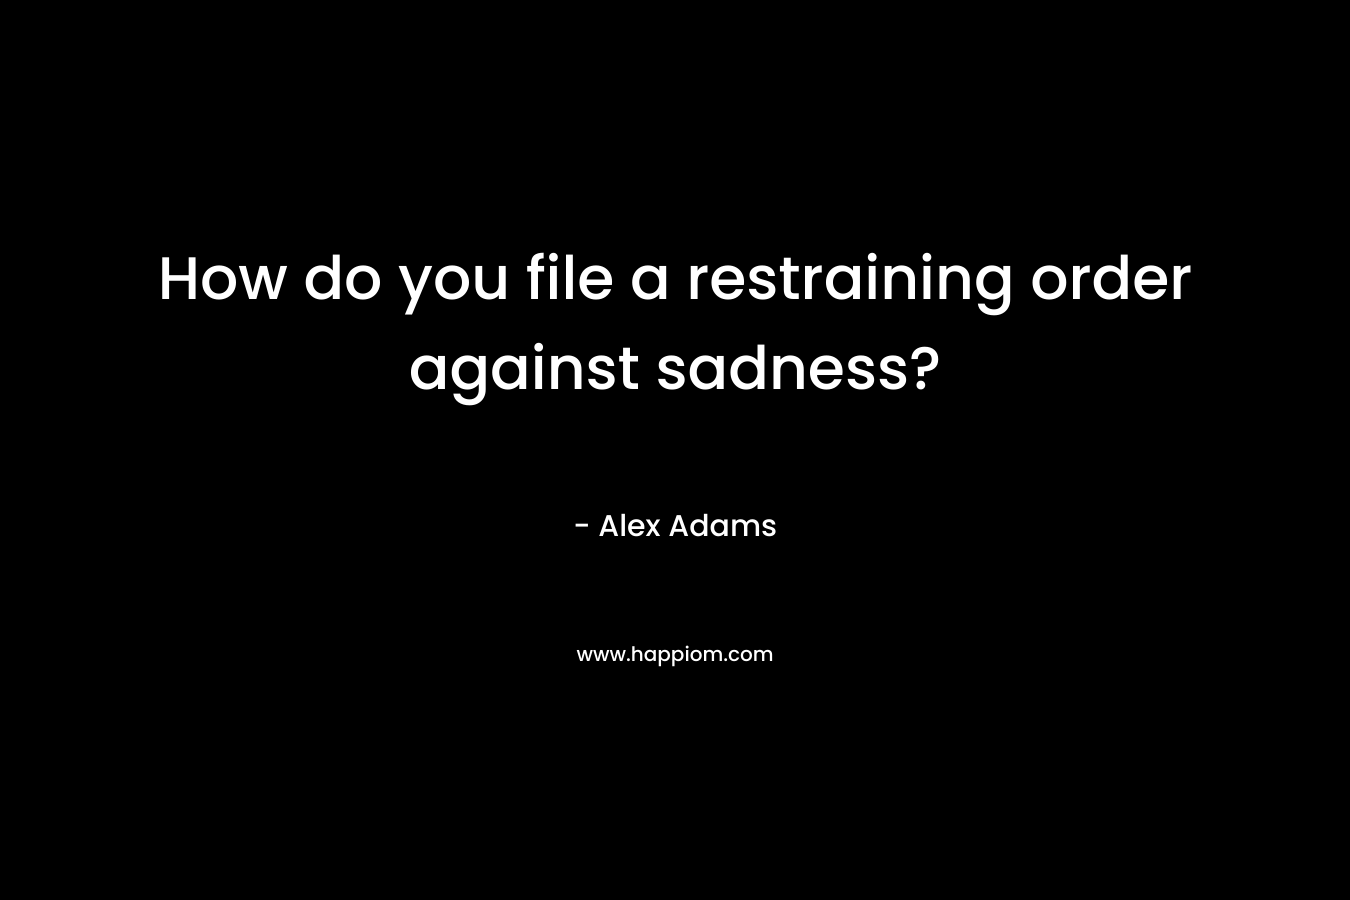 How do you file a restraining order against sadness?